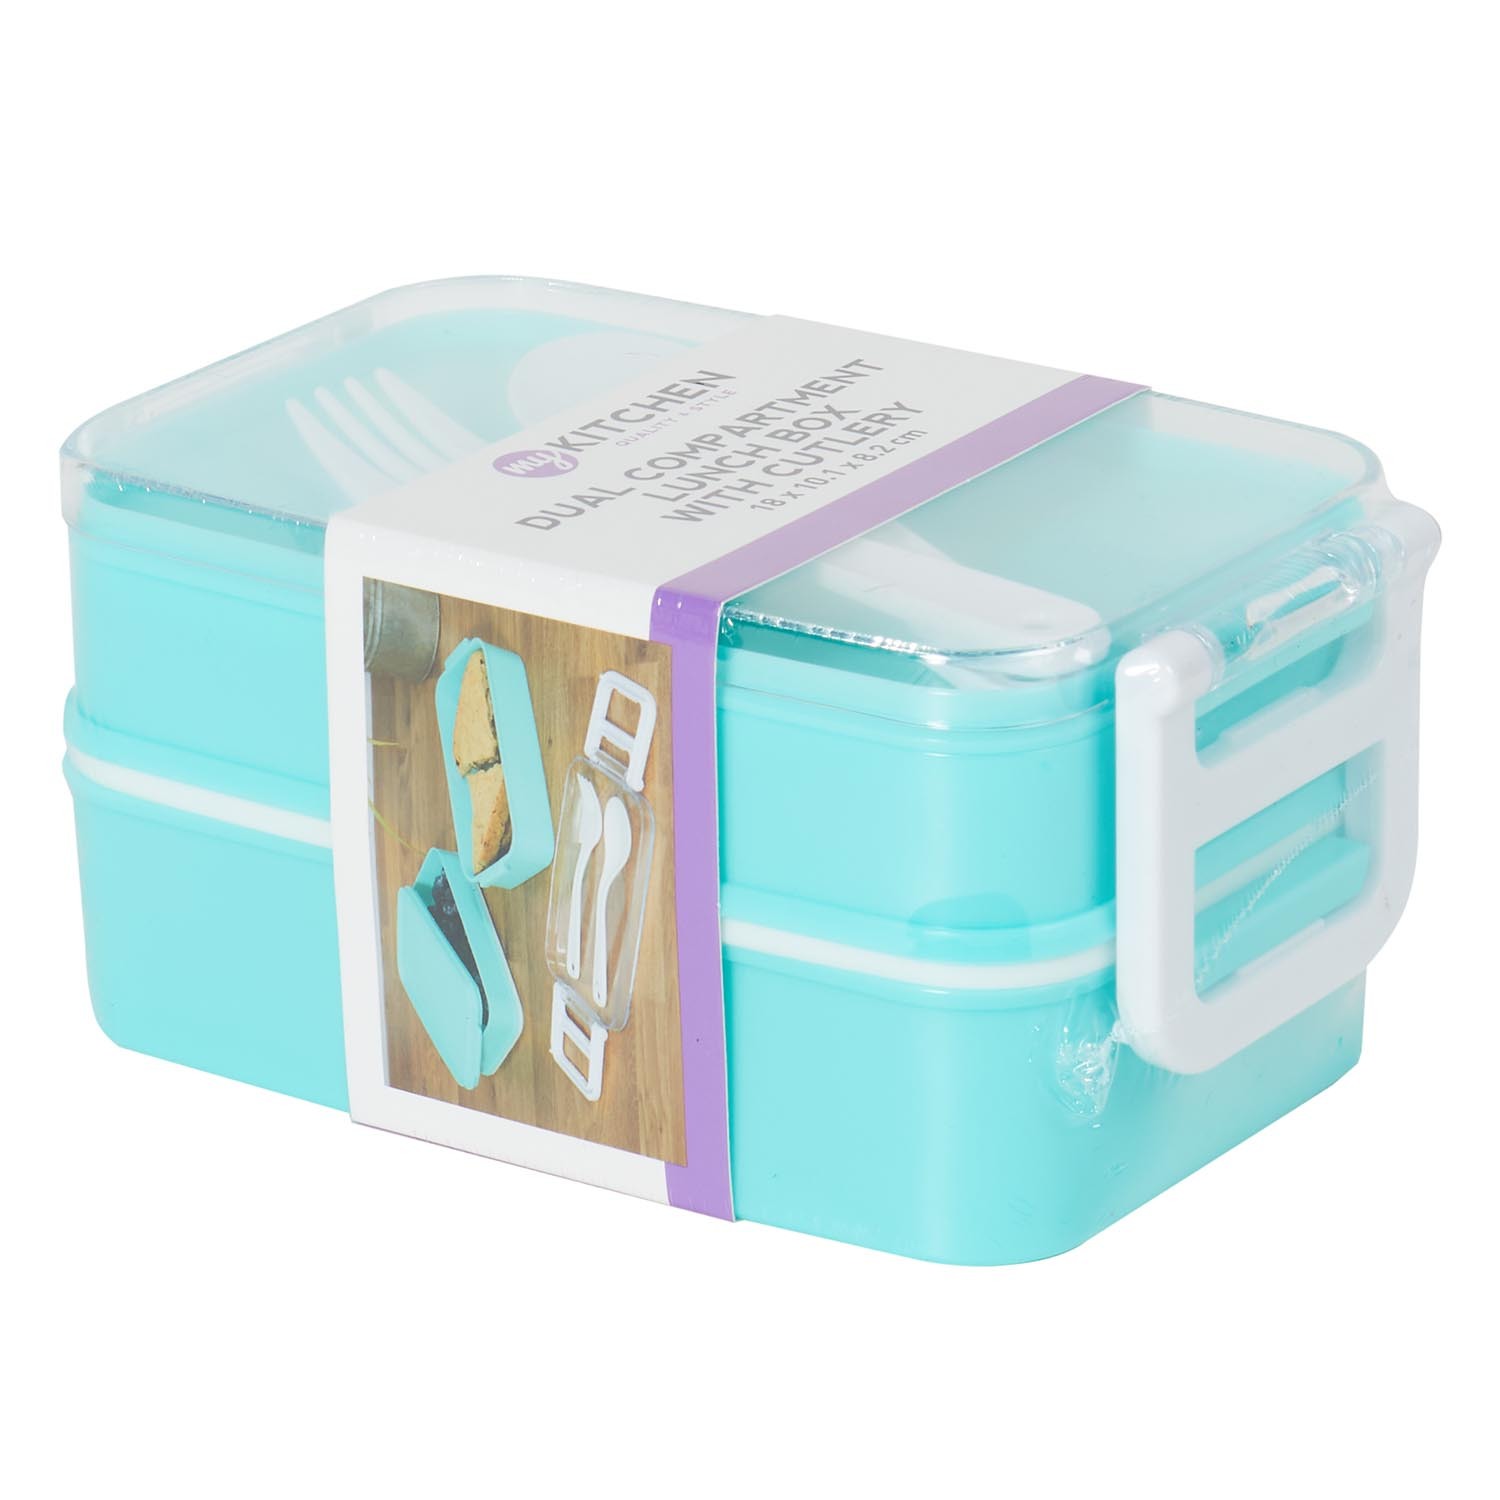 Dual Compartment Lunch Box with Cutlery - Blue Image 2